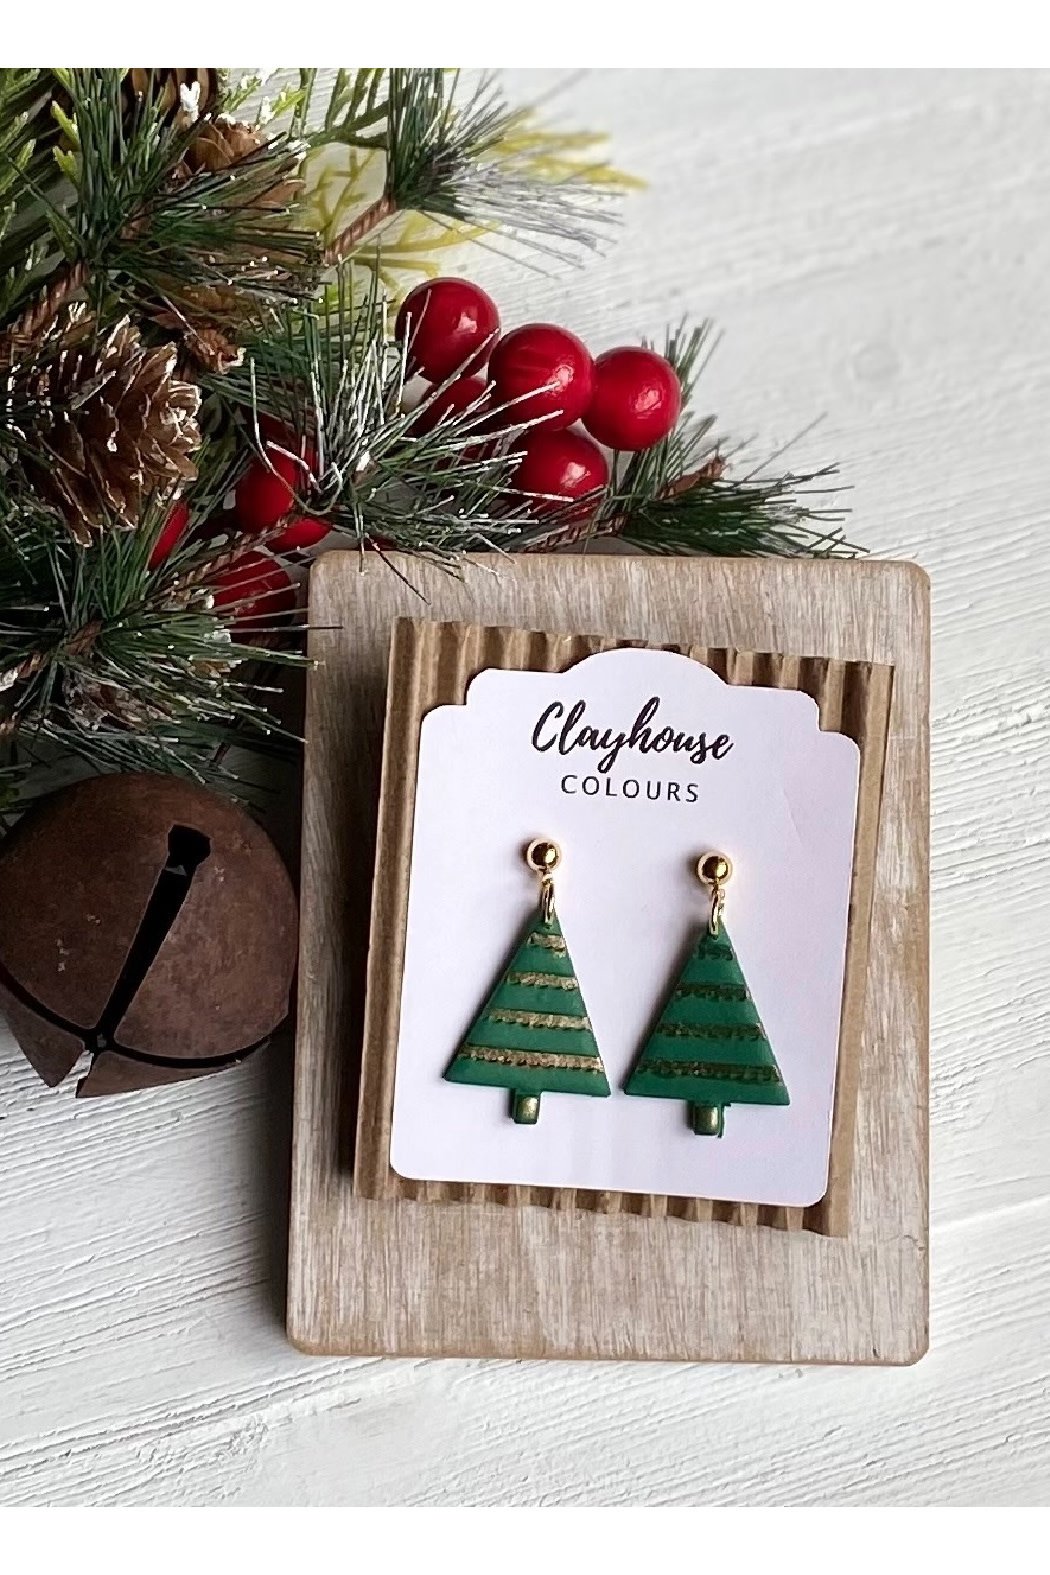 Clayhouse Colours Christmas Tree Clay Earrings